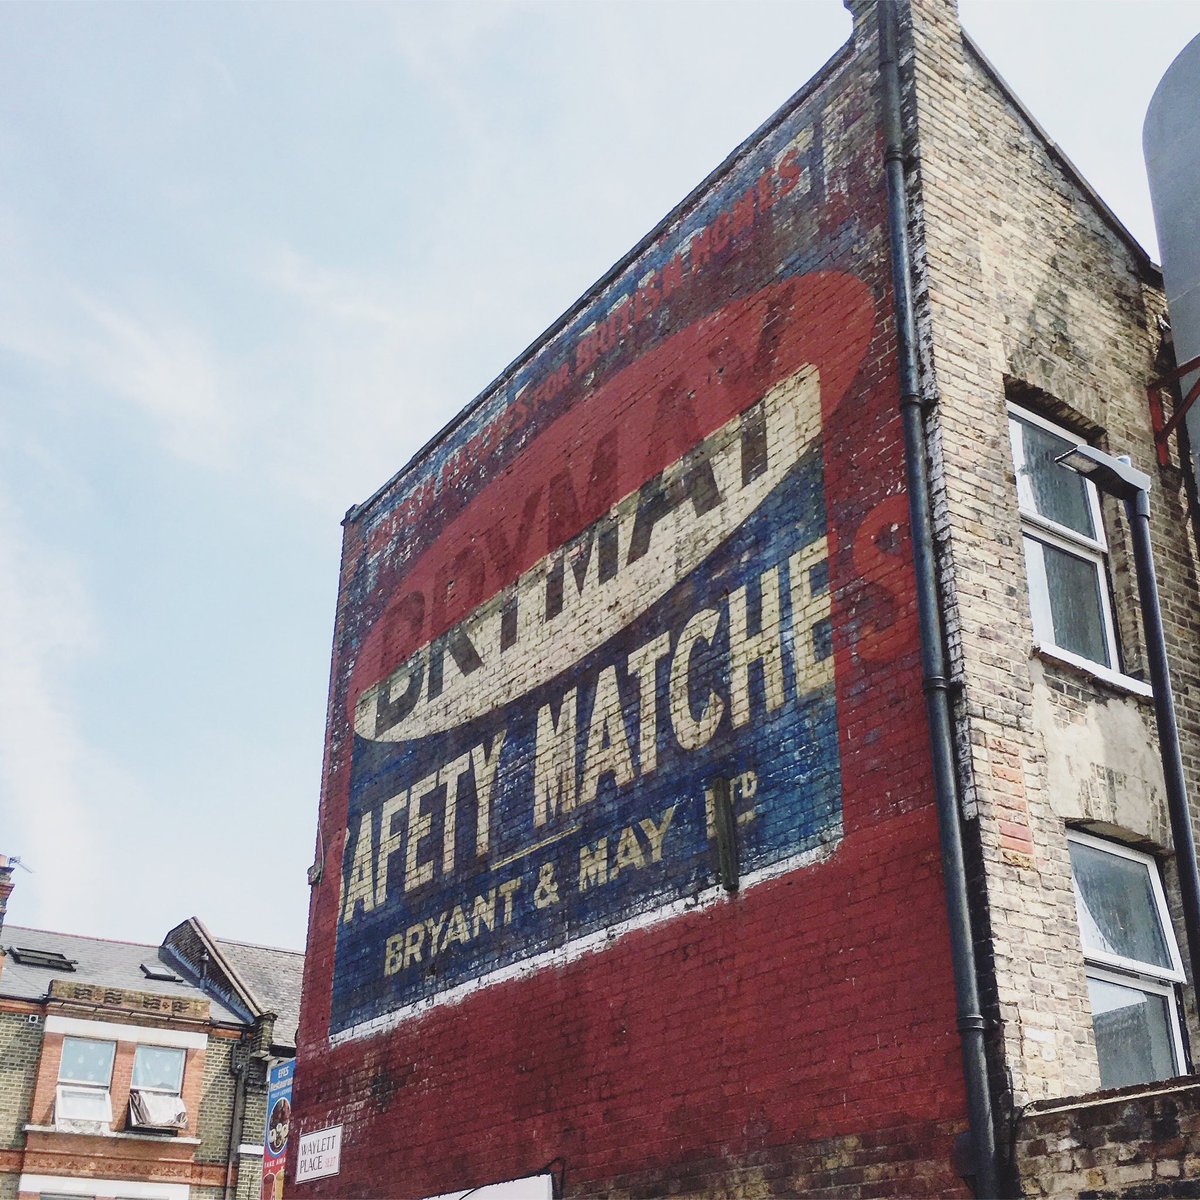 Ghost sign in West Norwood 👻 
.

#ghostsigns #london #westnorwood #signs #signage #signspotting #design #type #typography #graphicdesign #signwriting #lettering #traditional #craft #nothingisordinary #inspiration